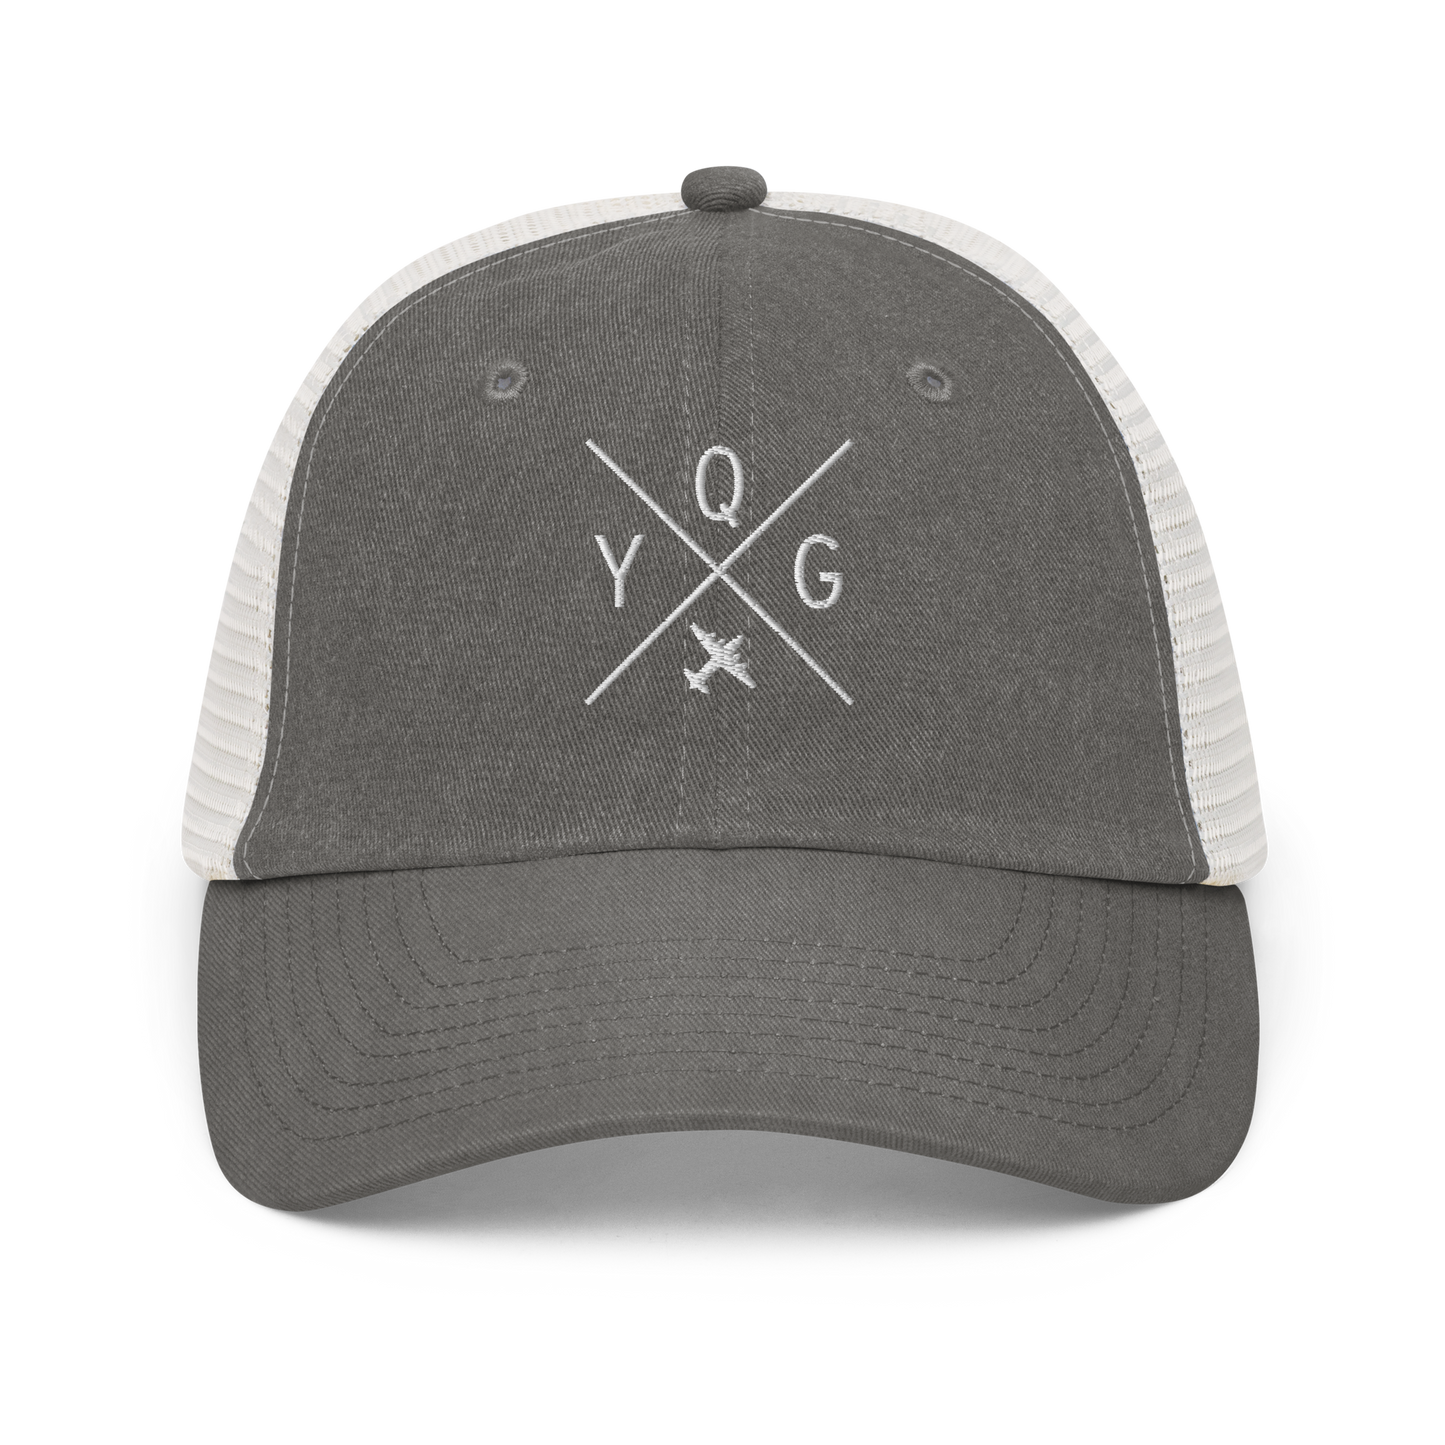 YHM Designs - YQG Windsor Pigment-Dyed Trucker Cap - Crossed-X Design with Airport Code and Vintage Propliner - White Embroidery - Image 09